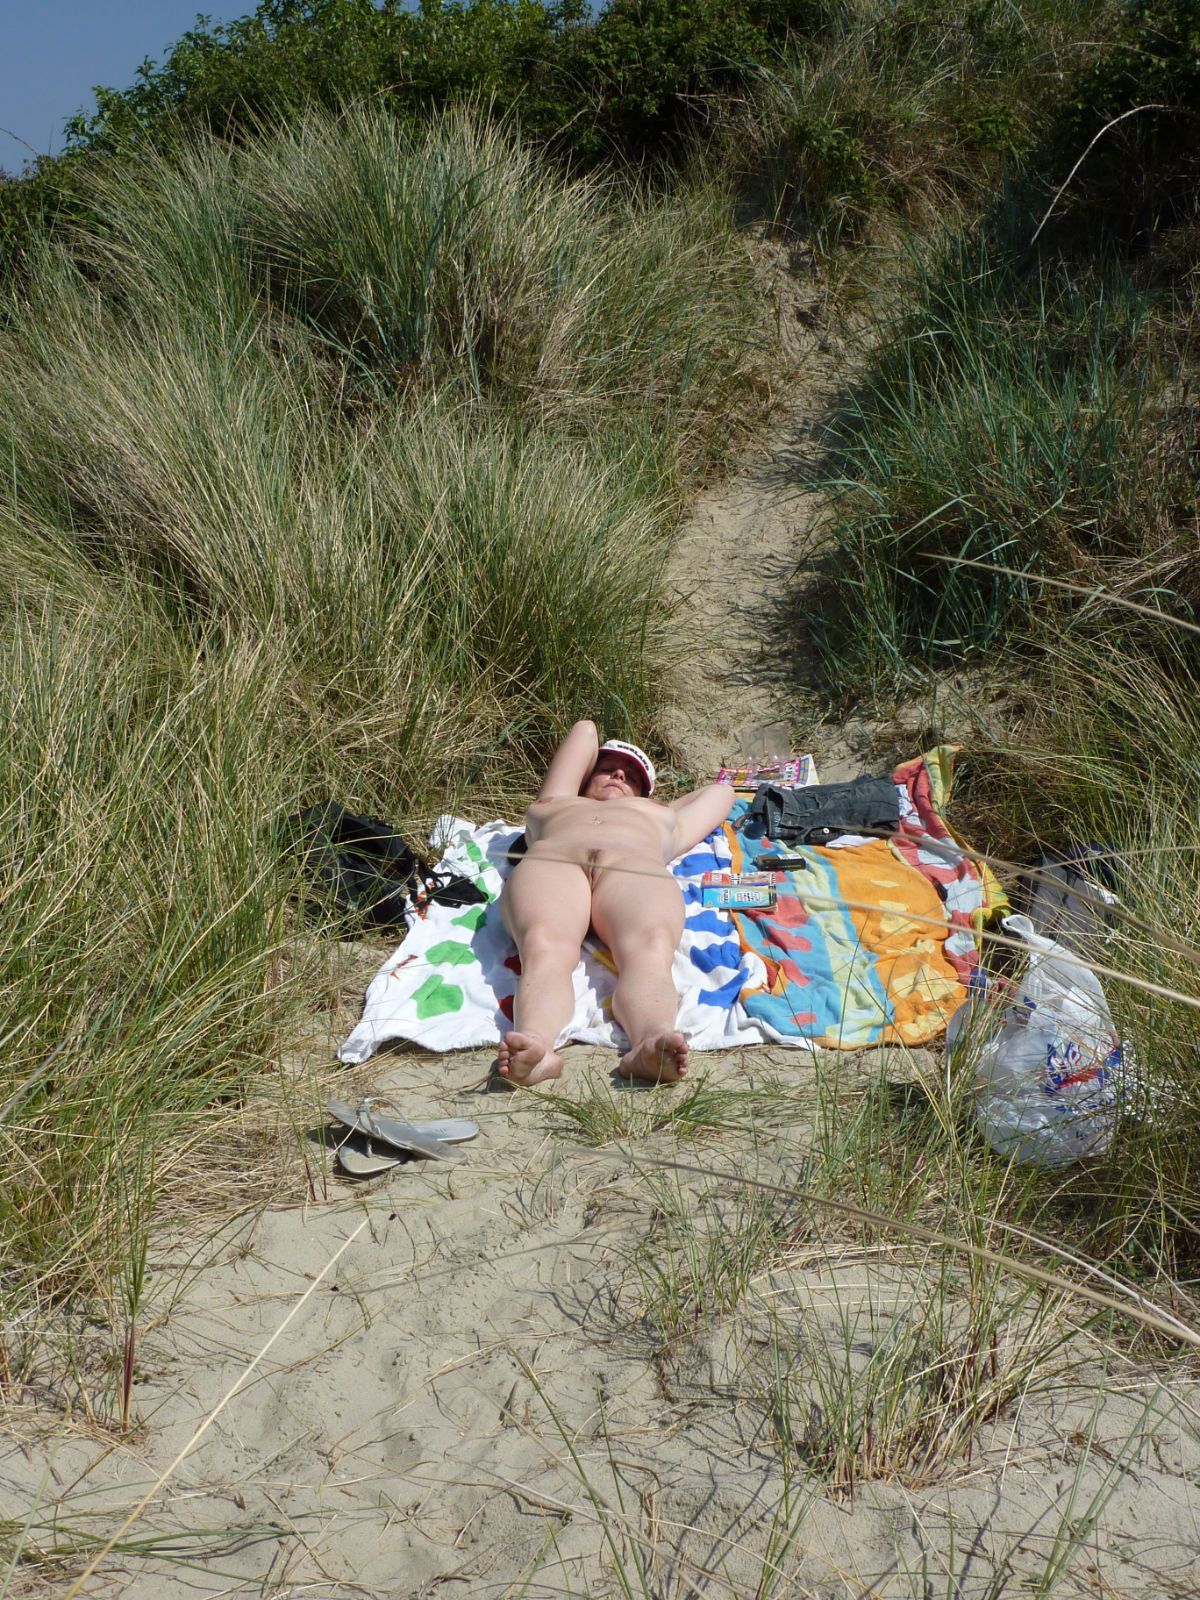 Milf slut naked waiting for stranger to fuck her on the beach voyeur real nudity public nudity nude beach milf pics howife